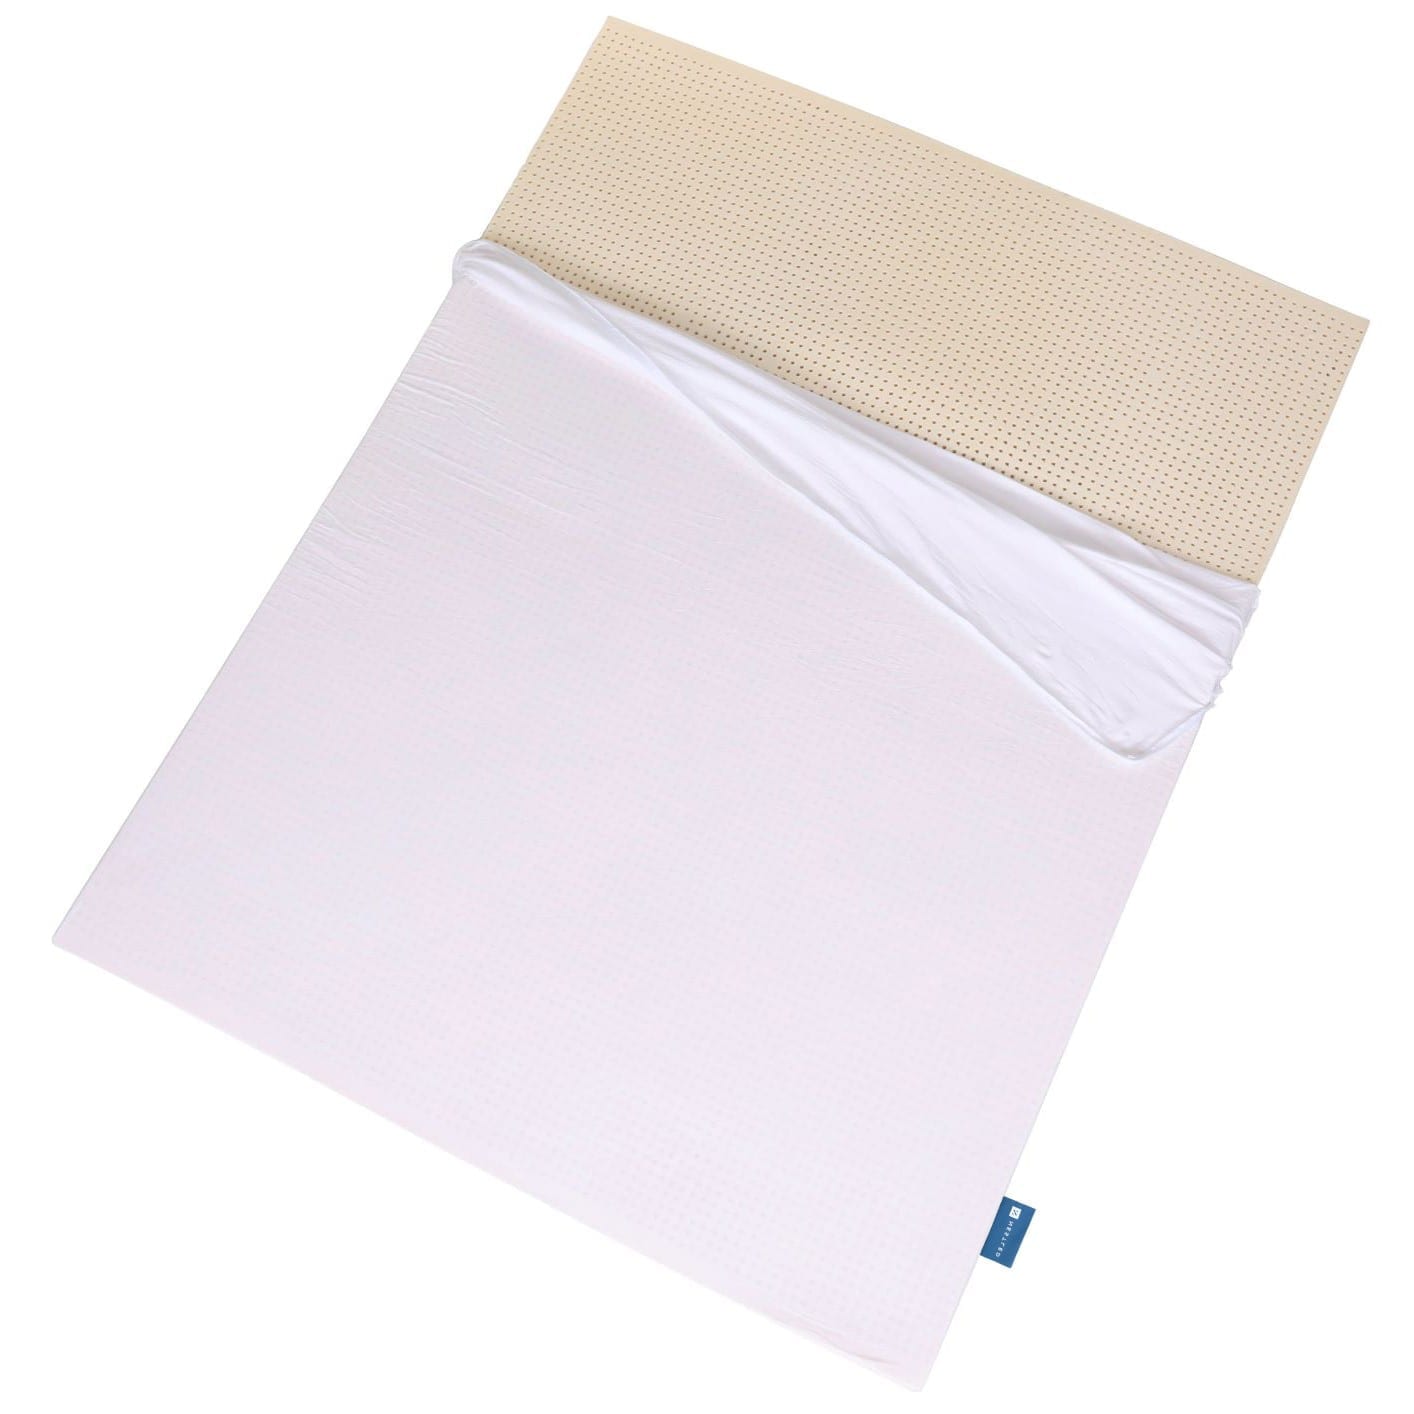 The best mattress for Airbnb with a cotton sheet pulled down to show the comfortable latex inside.